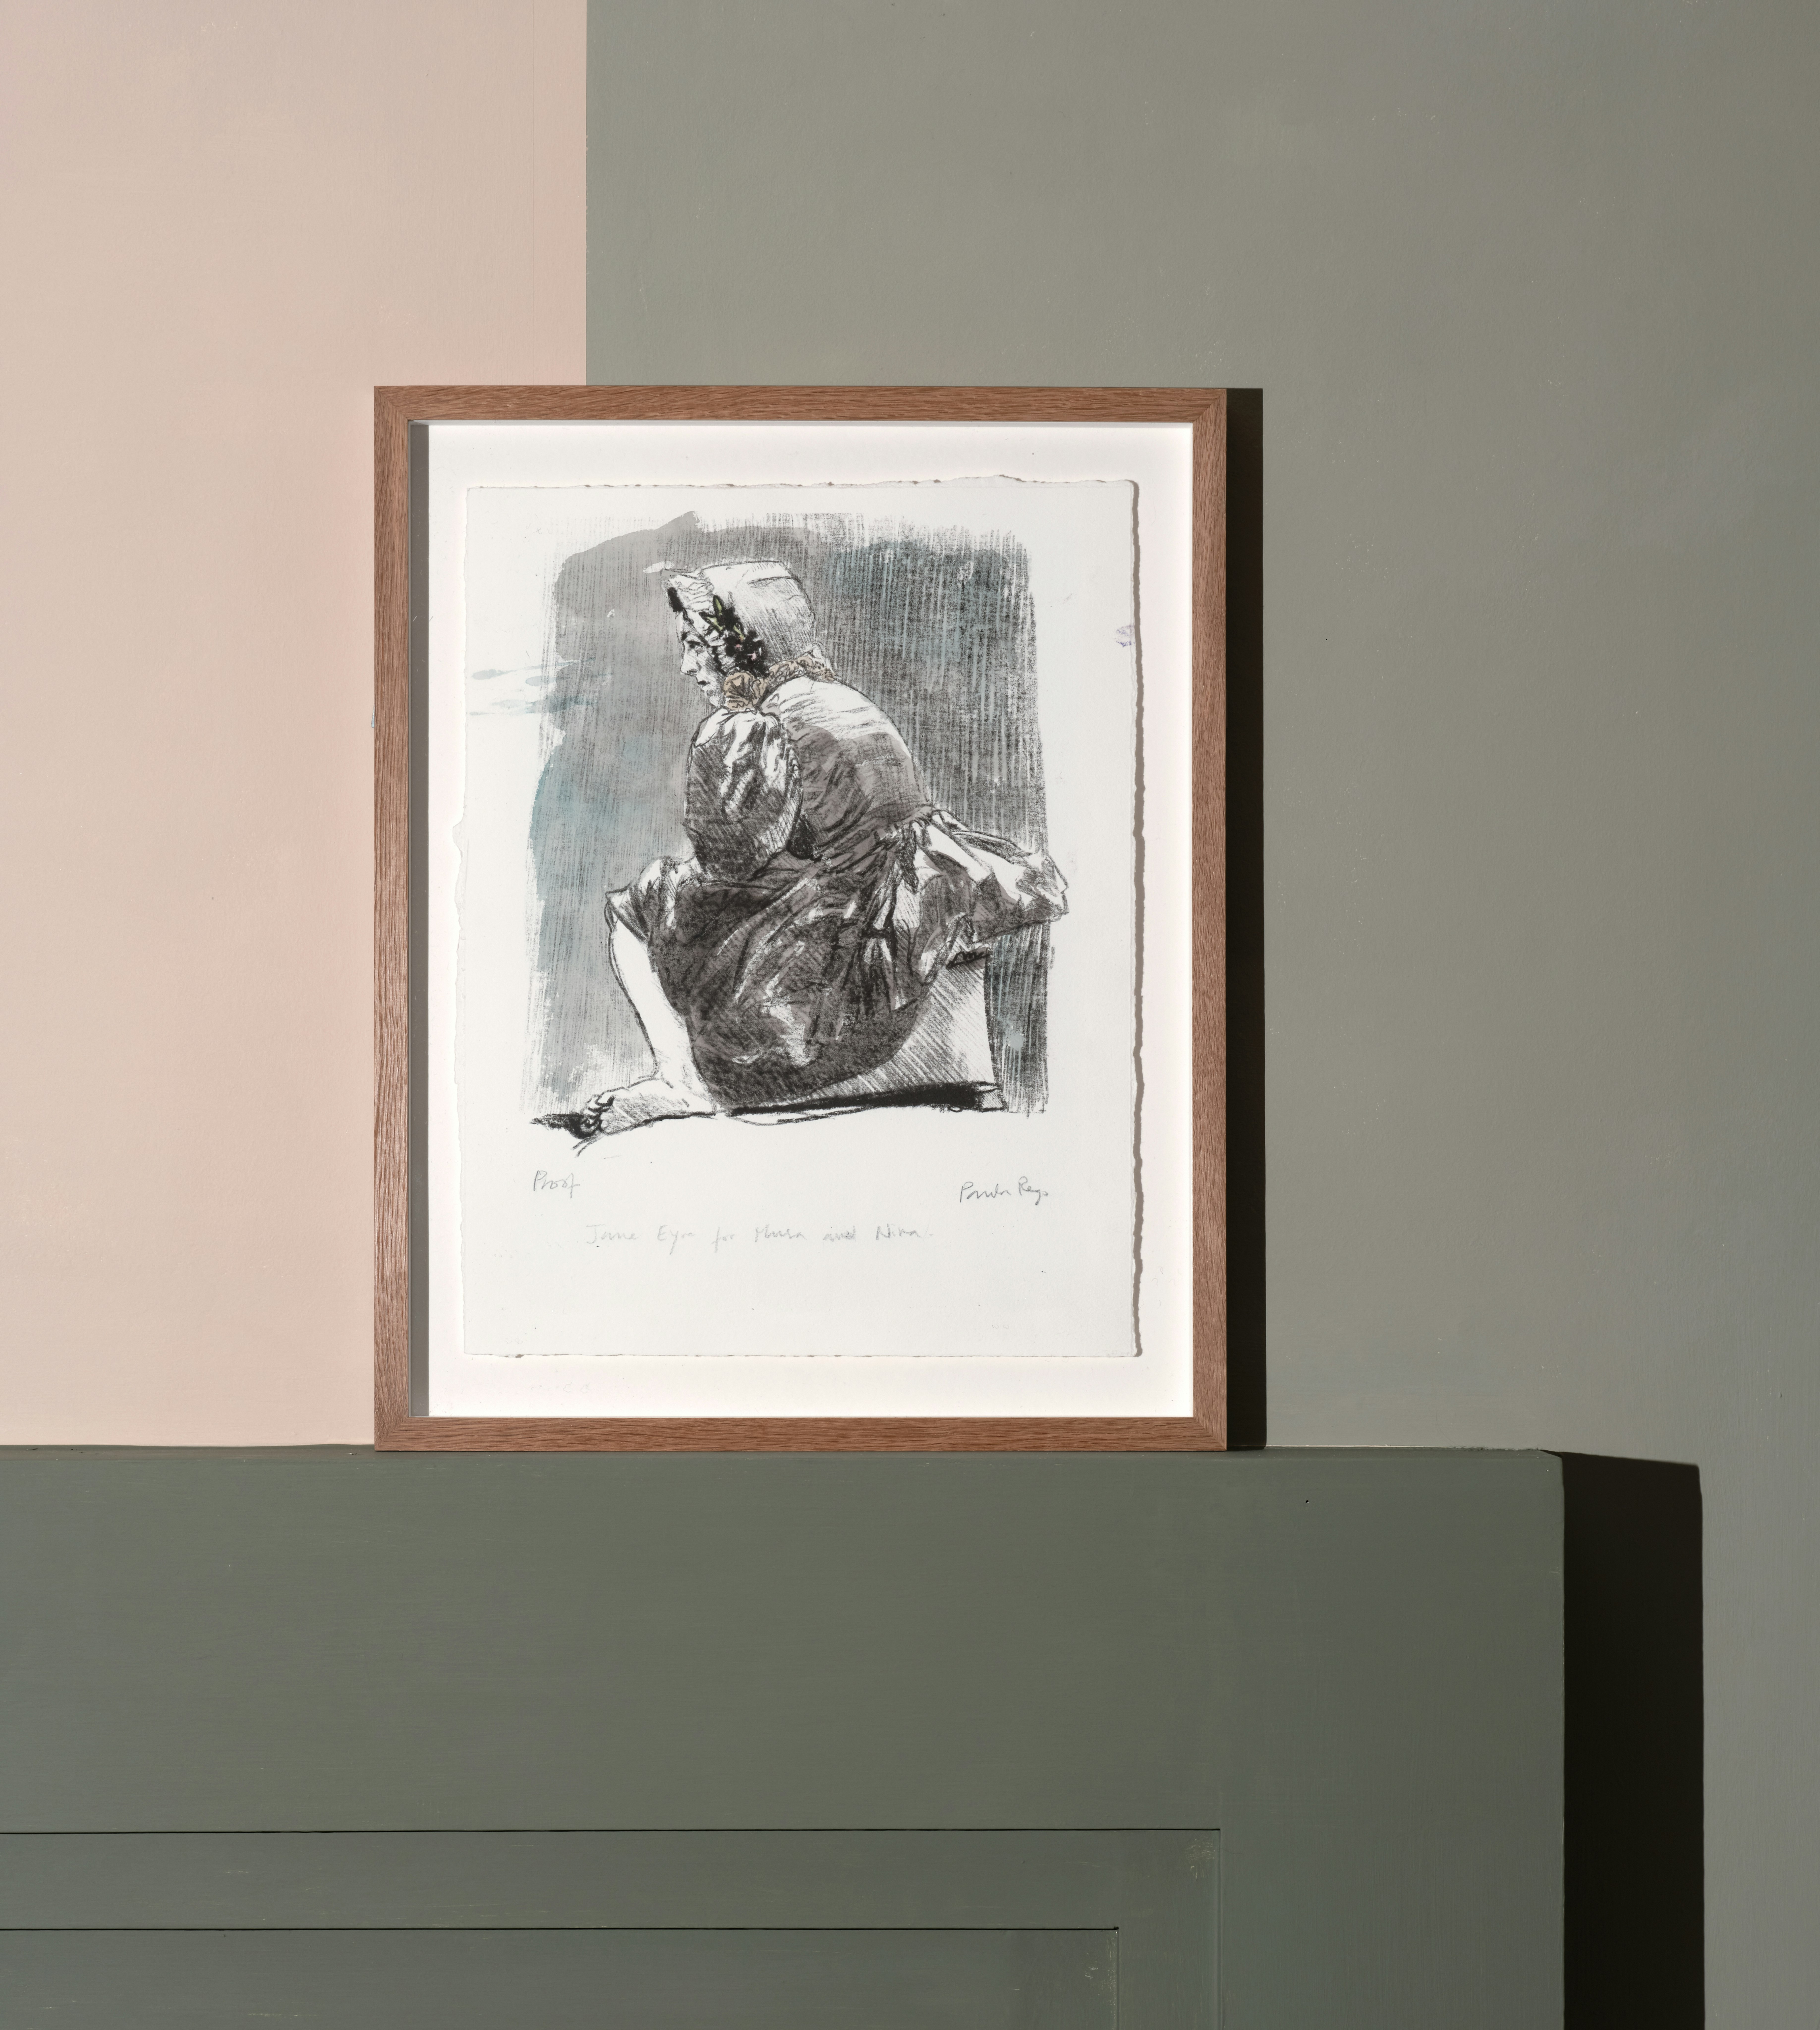 installation photograph of lithograph with hand-colouring by Paula Rego depicting Jayne Eyre in profile crouching